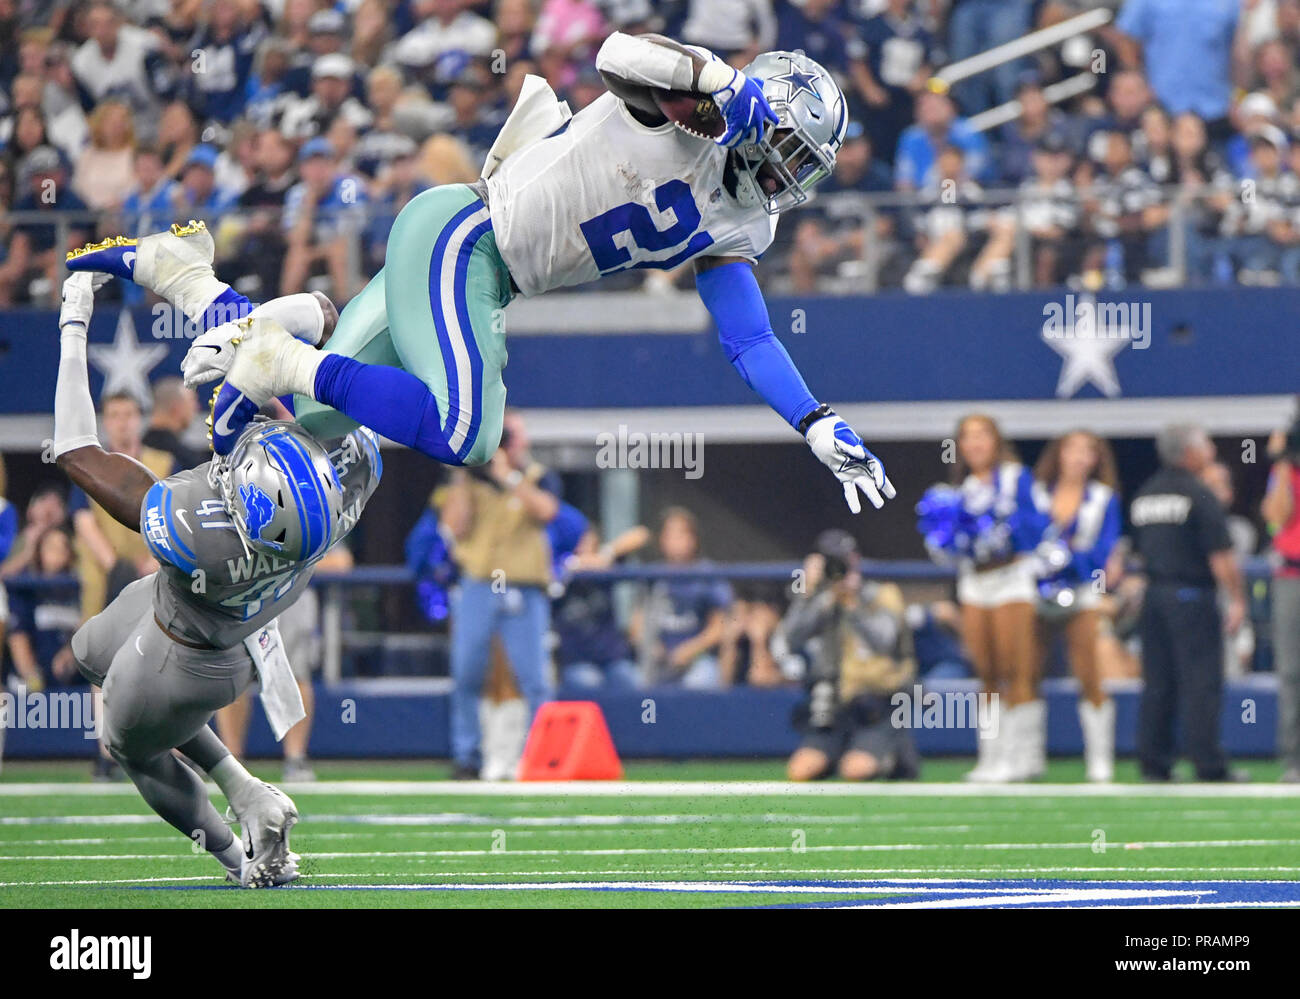 September 30, 2018: Dallas Cowboys running back Ezekiel Elliott #21 hurdles over Detroit Lions defensive back Tracy Walker #47 in the third quarter during an NFL football game between the Detroit Lions and the Dallas Cowboys at AT&T Stadium in Arlington, TX Dallas defeated Detroit 26-24 Albert Pena/CSM Stock Photo